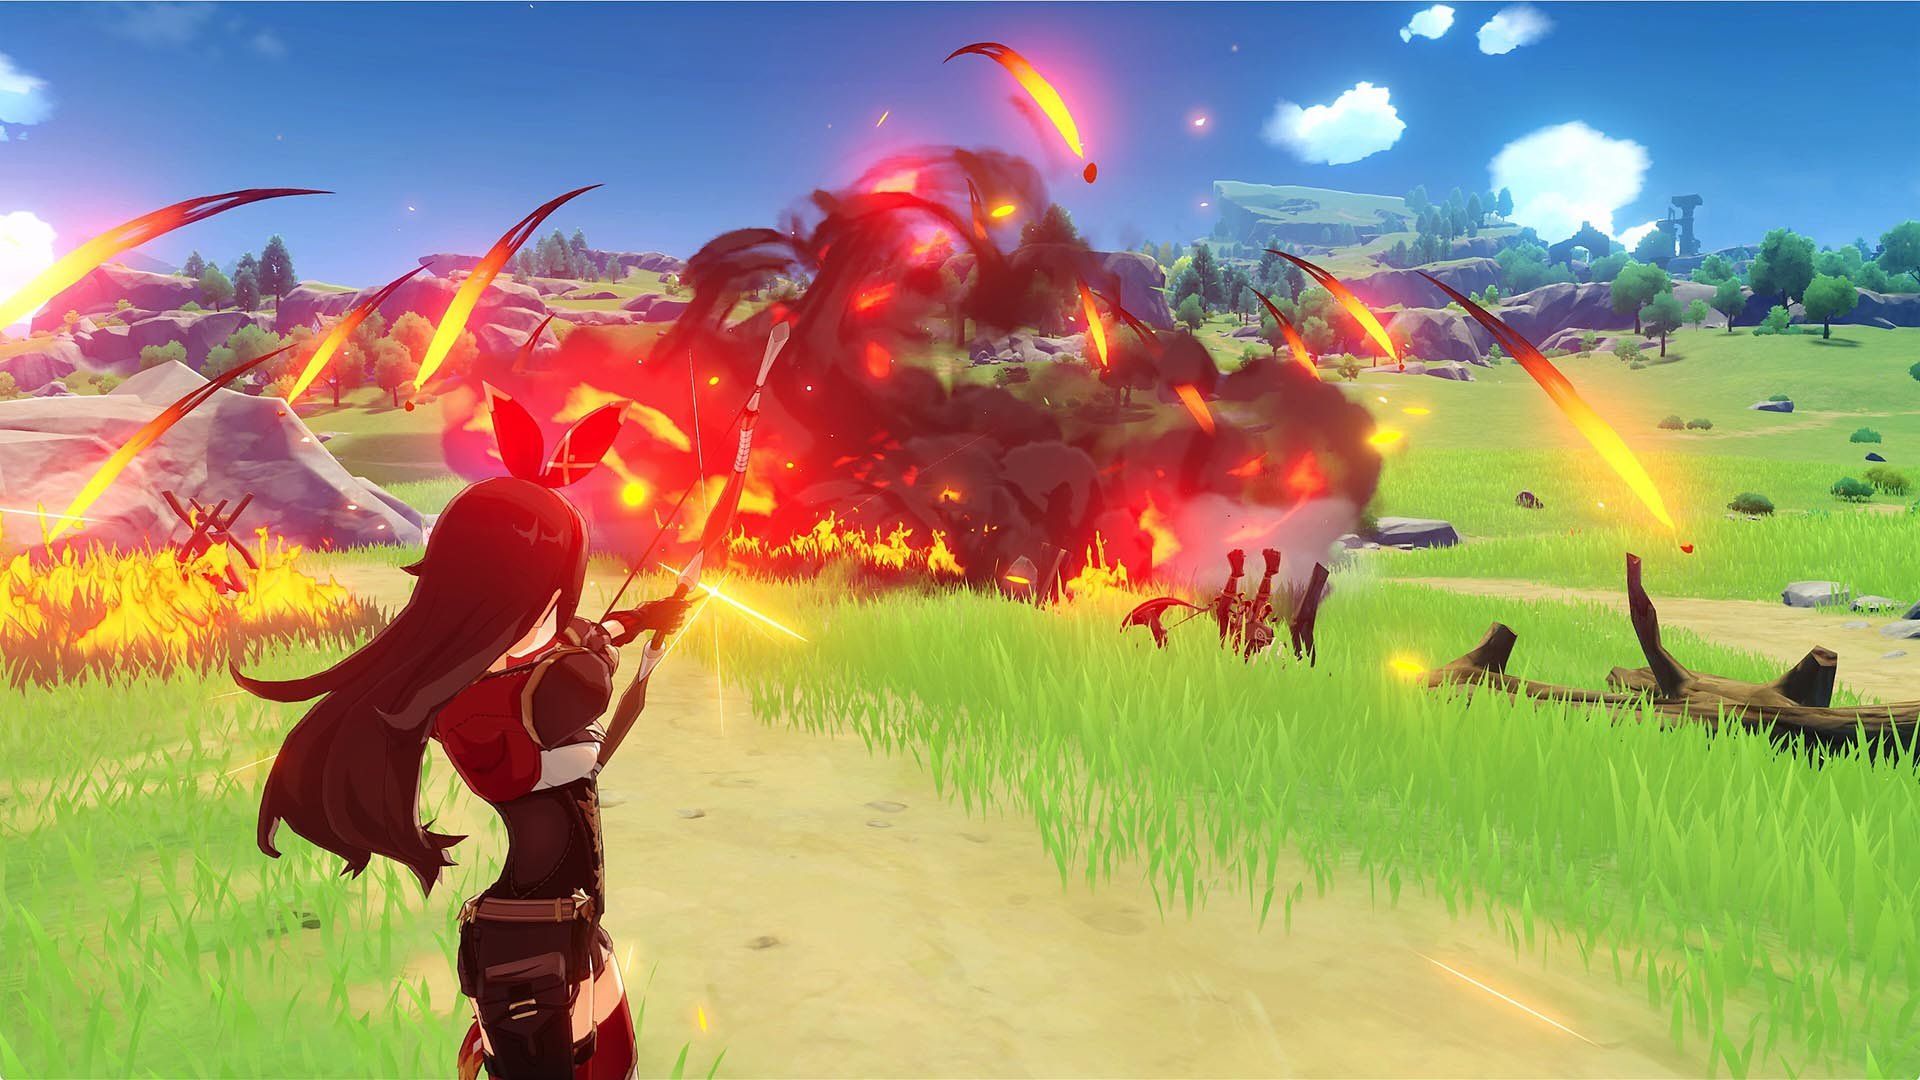 Open World Action RPG Genshin Impact Gets Closed Beta Test on PS4 Next Month